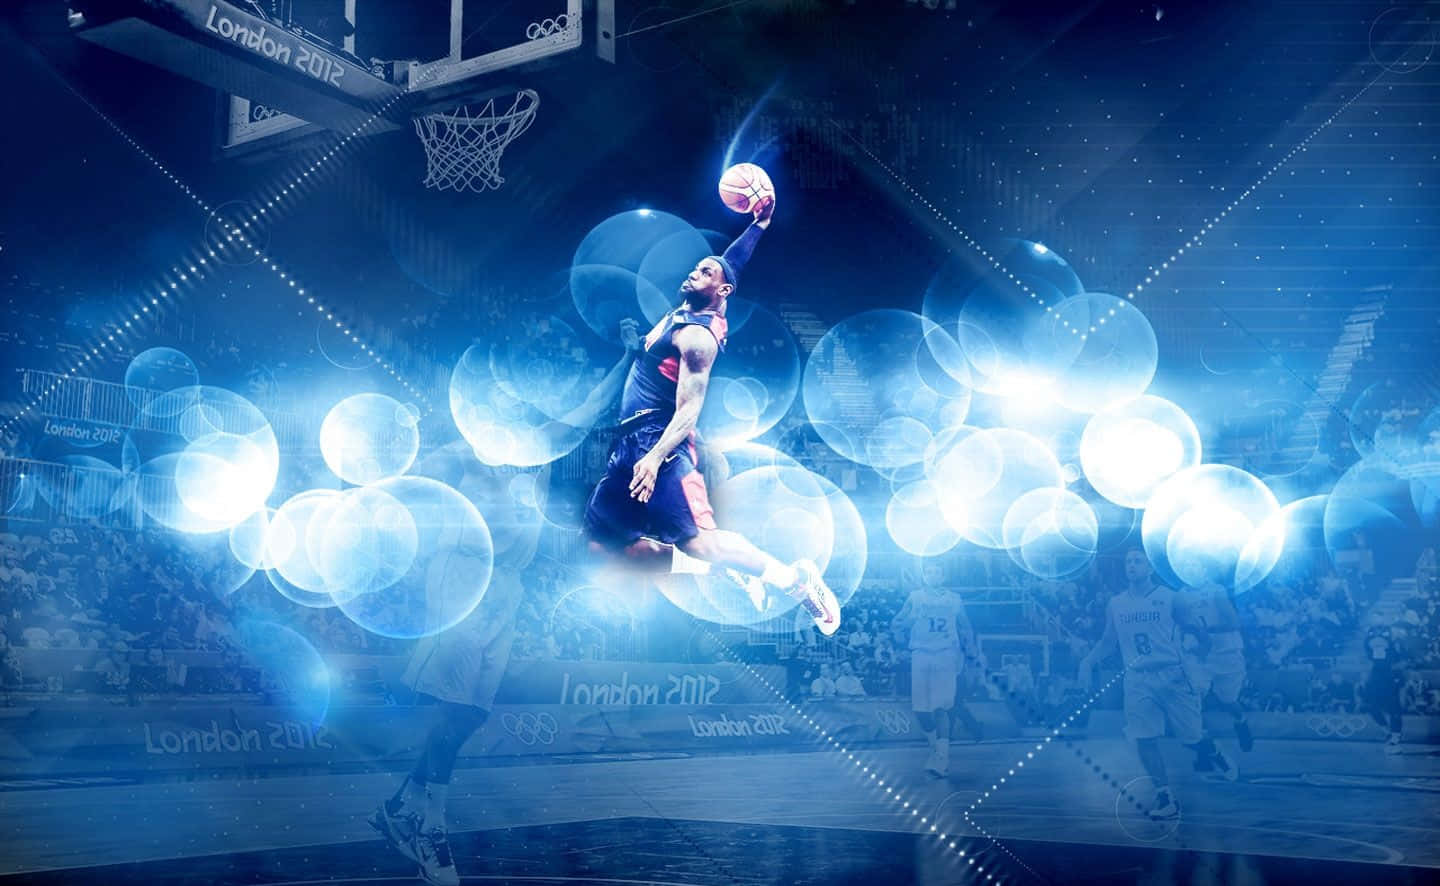 Turn Up Your Game with Blue Basketball Wallpaper